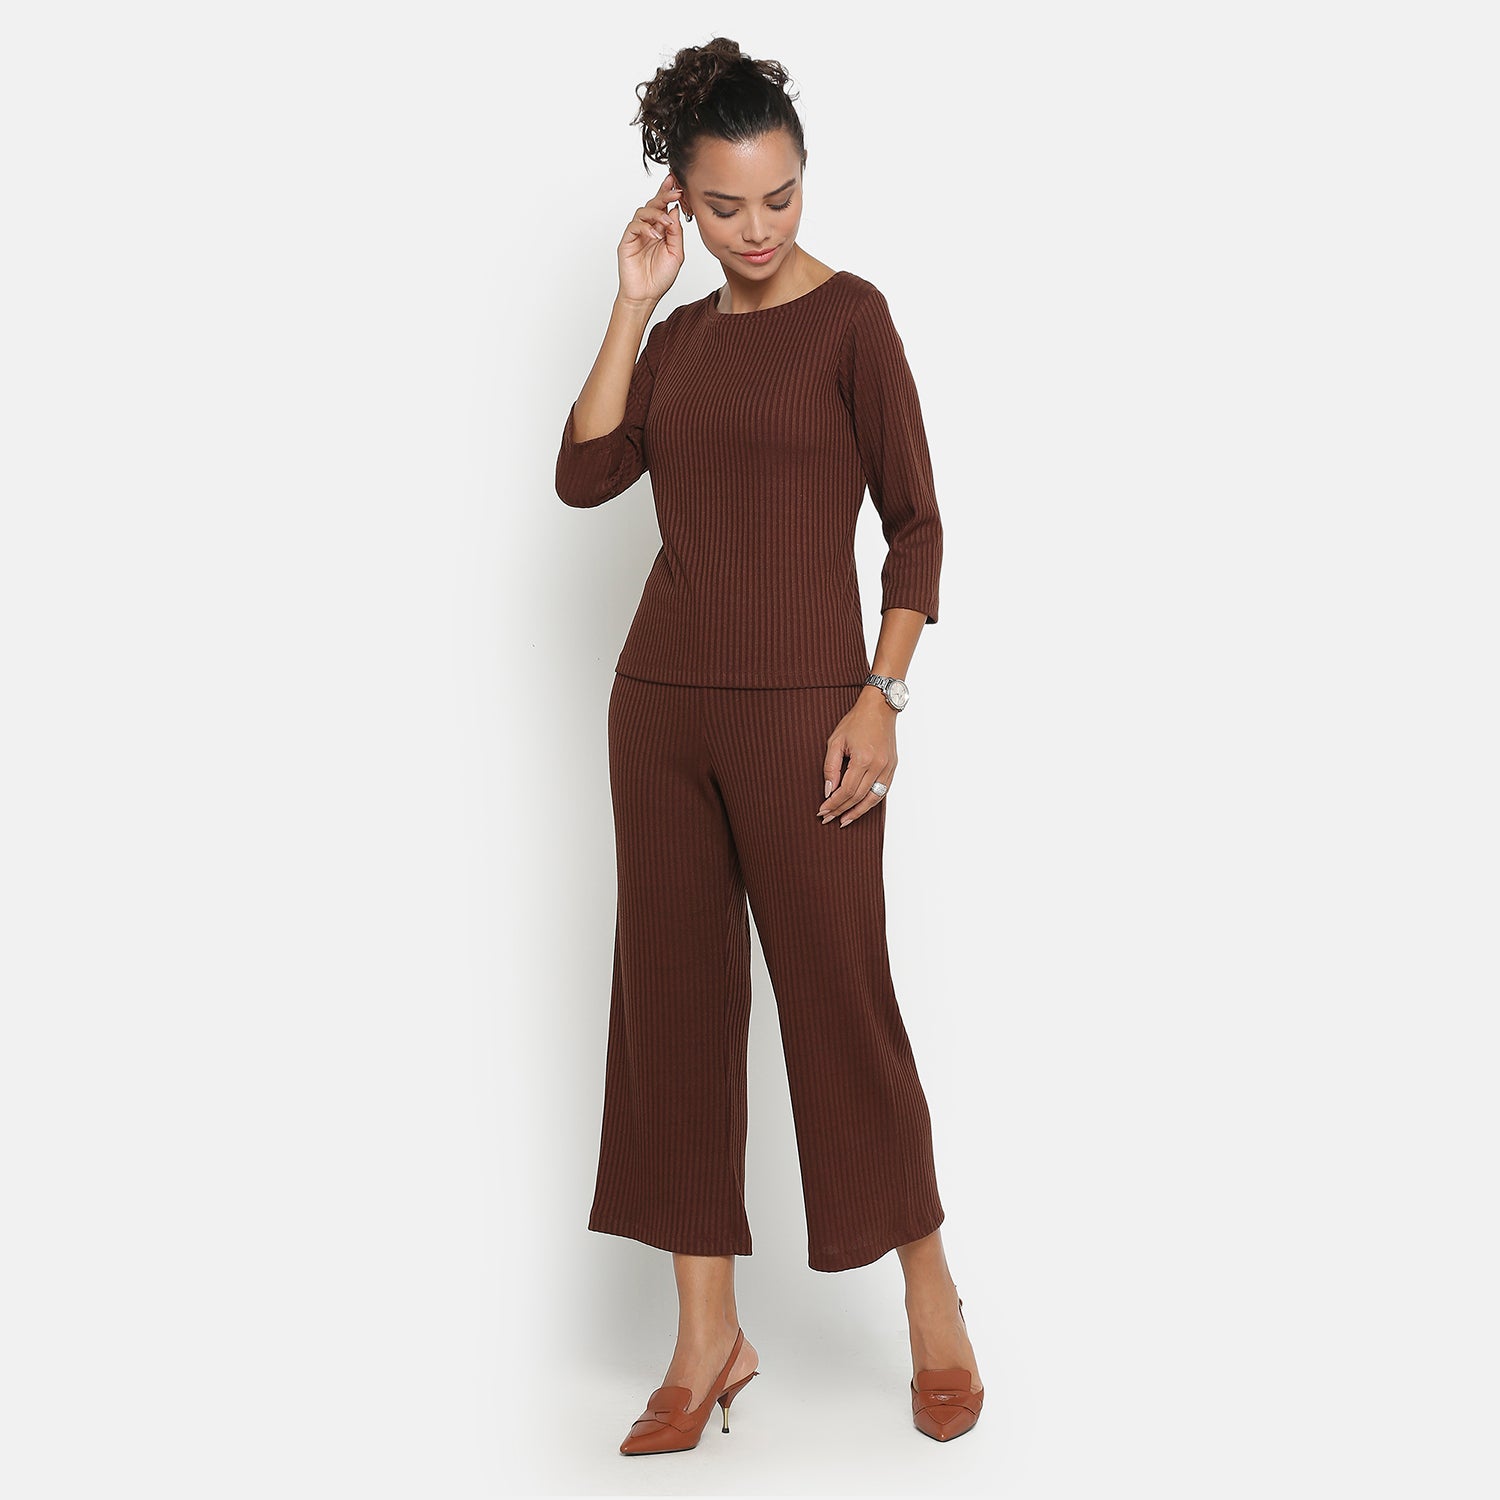 Brown ribbed top with sleeves